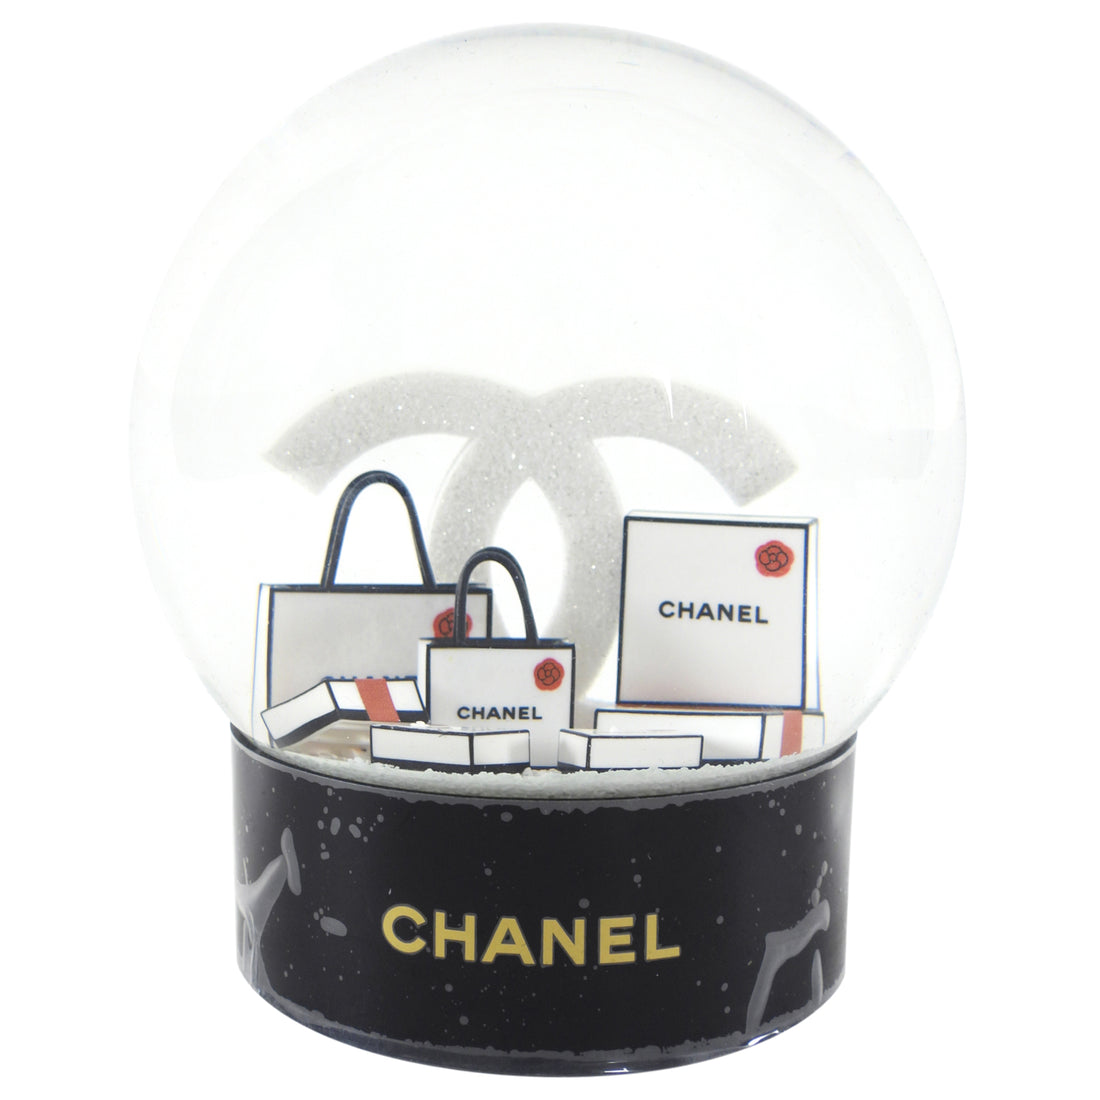 ❗️NEW CHANEL SNOW GLOBE❗️ . This vintage Chanel snow globe has just arrived  from our supplier in France! Only one available, an amazing…